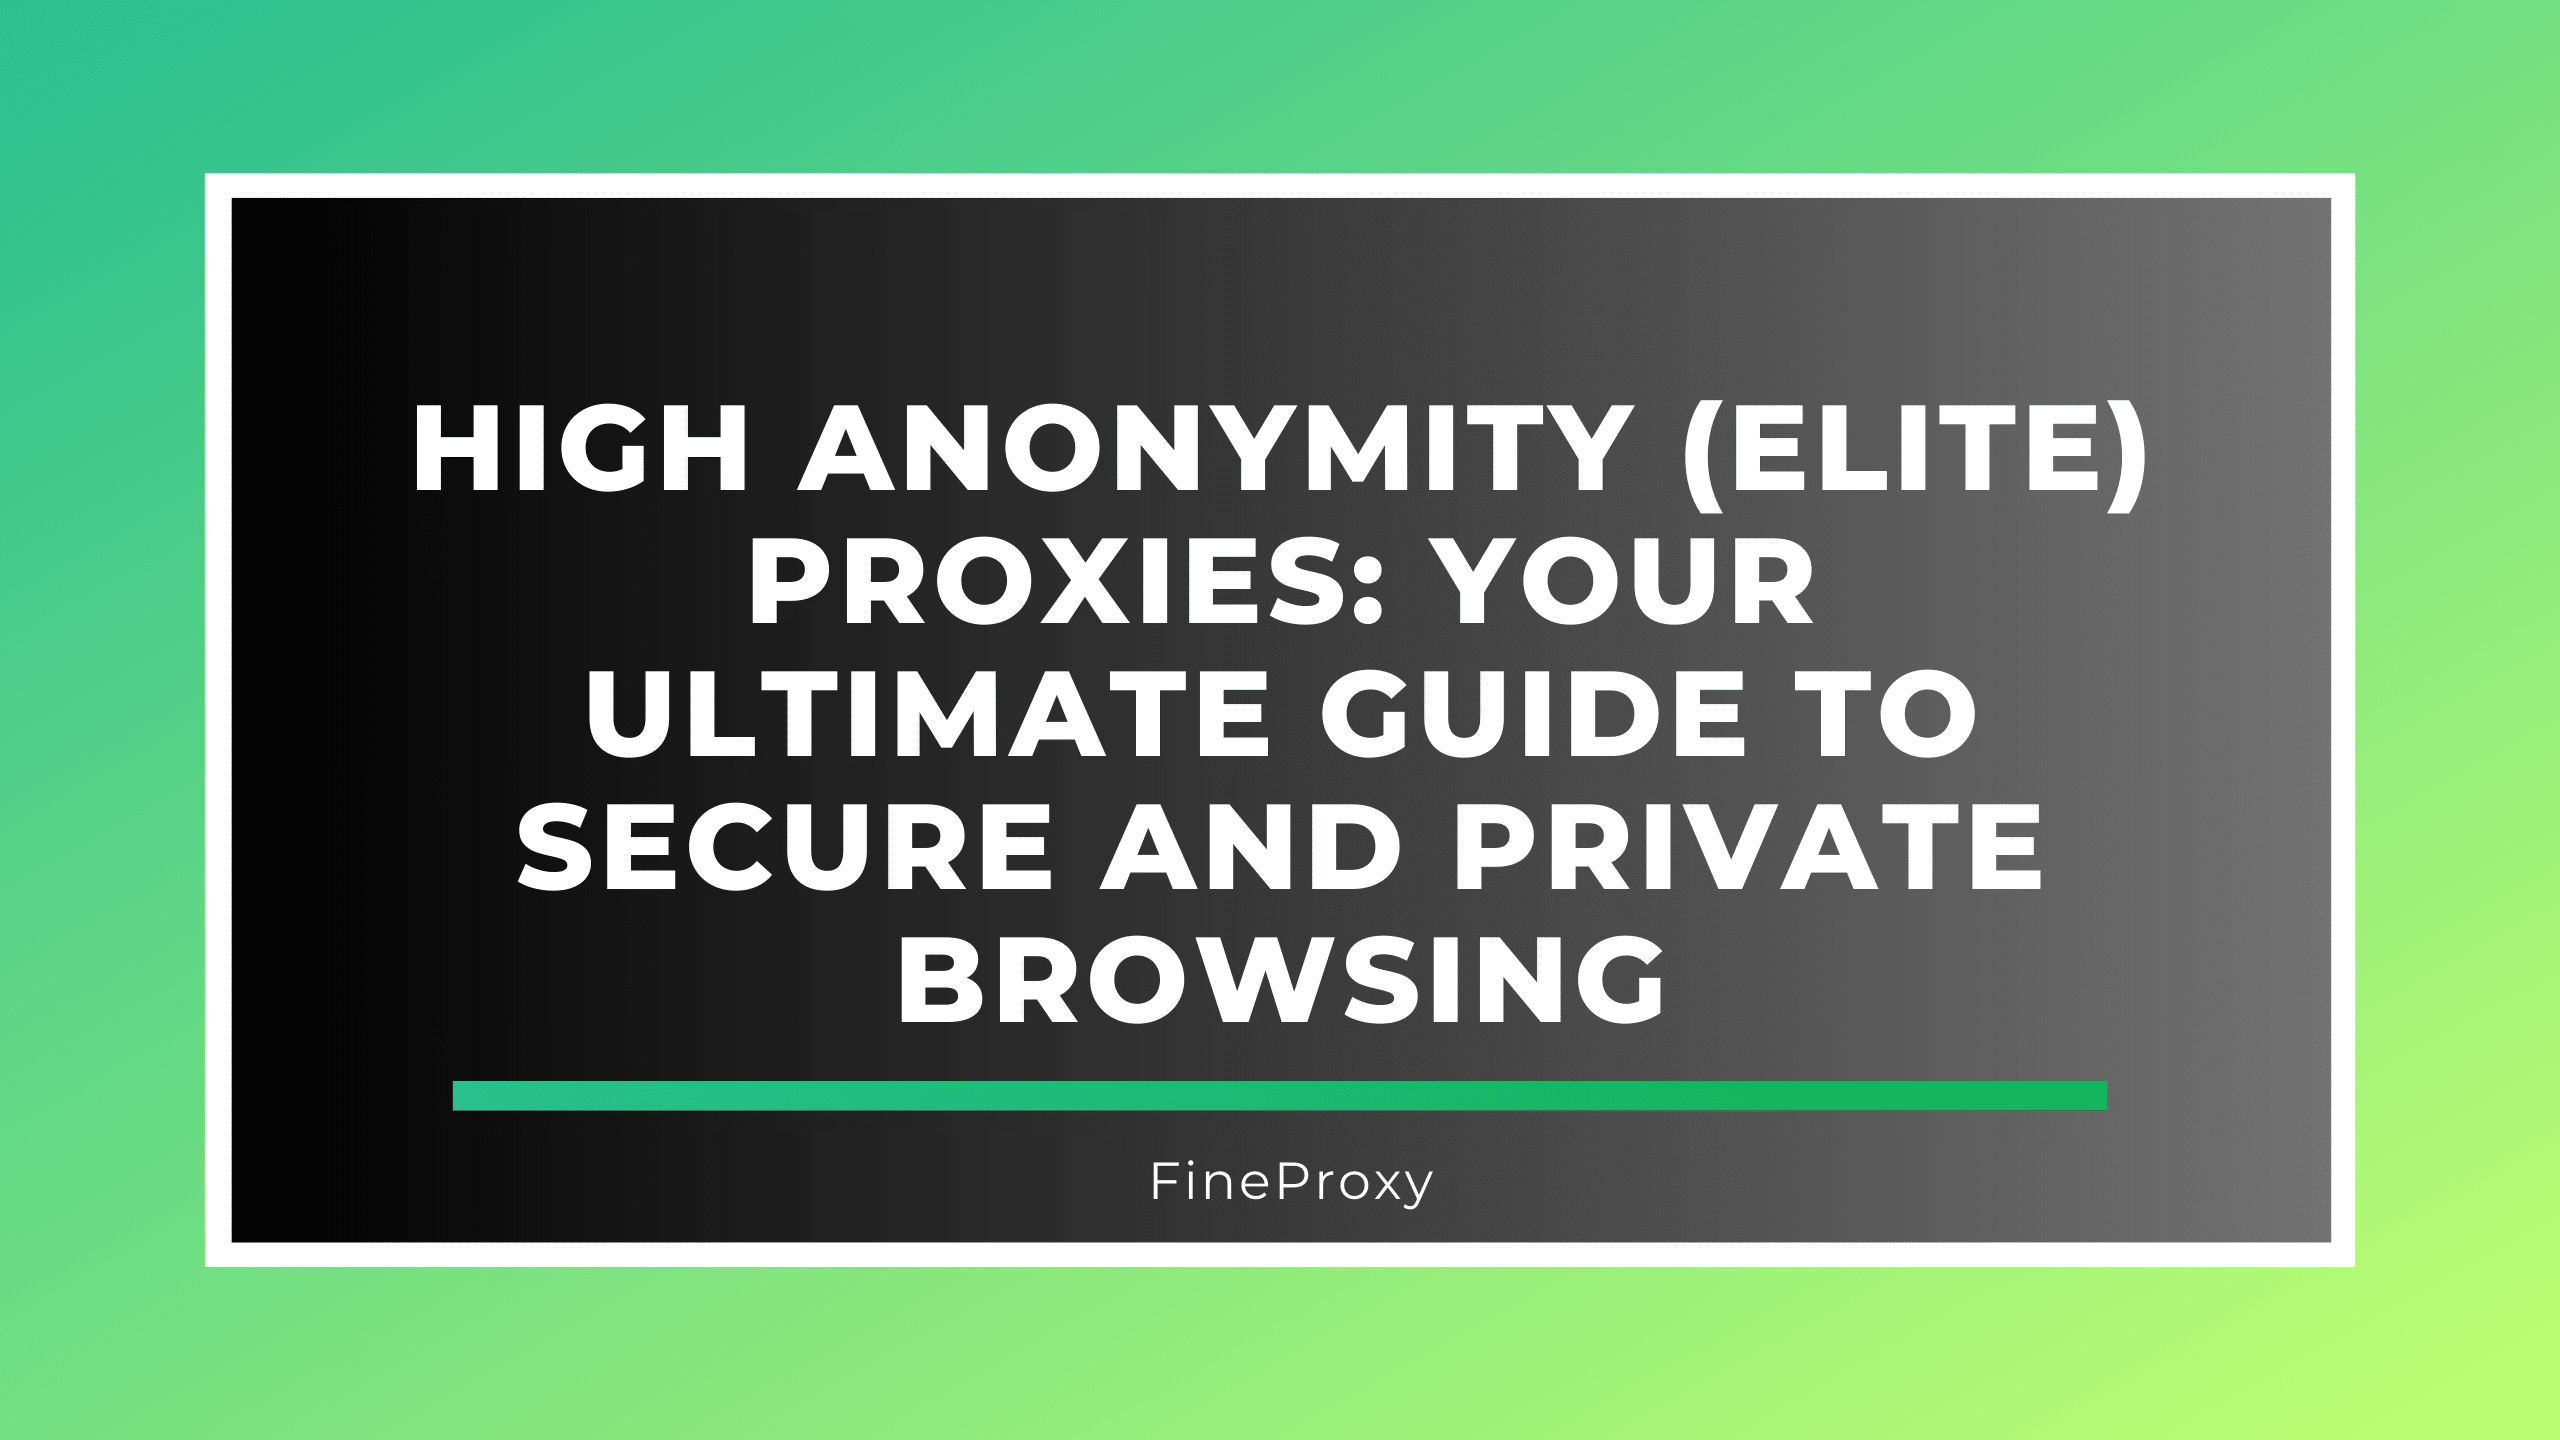 High Anonymity (Elite) Proxies: Your Ultimate Guide to Secure and Private Browsing